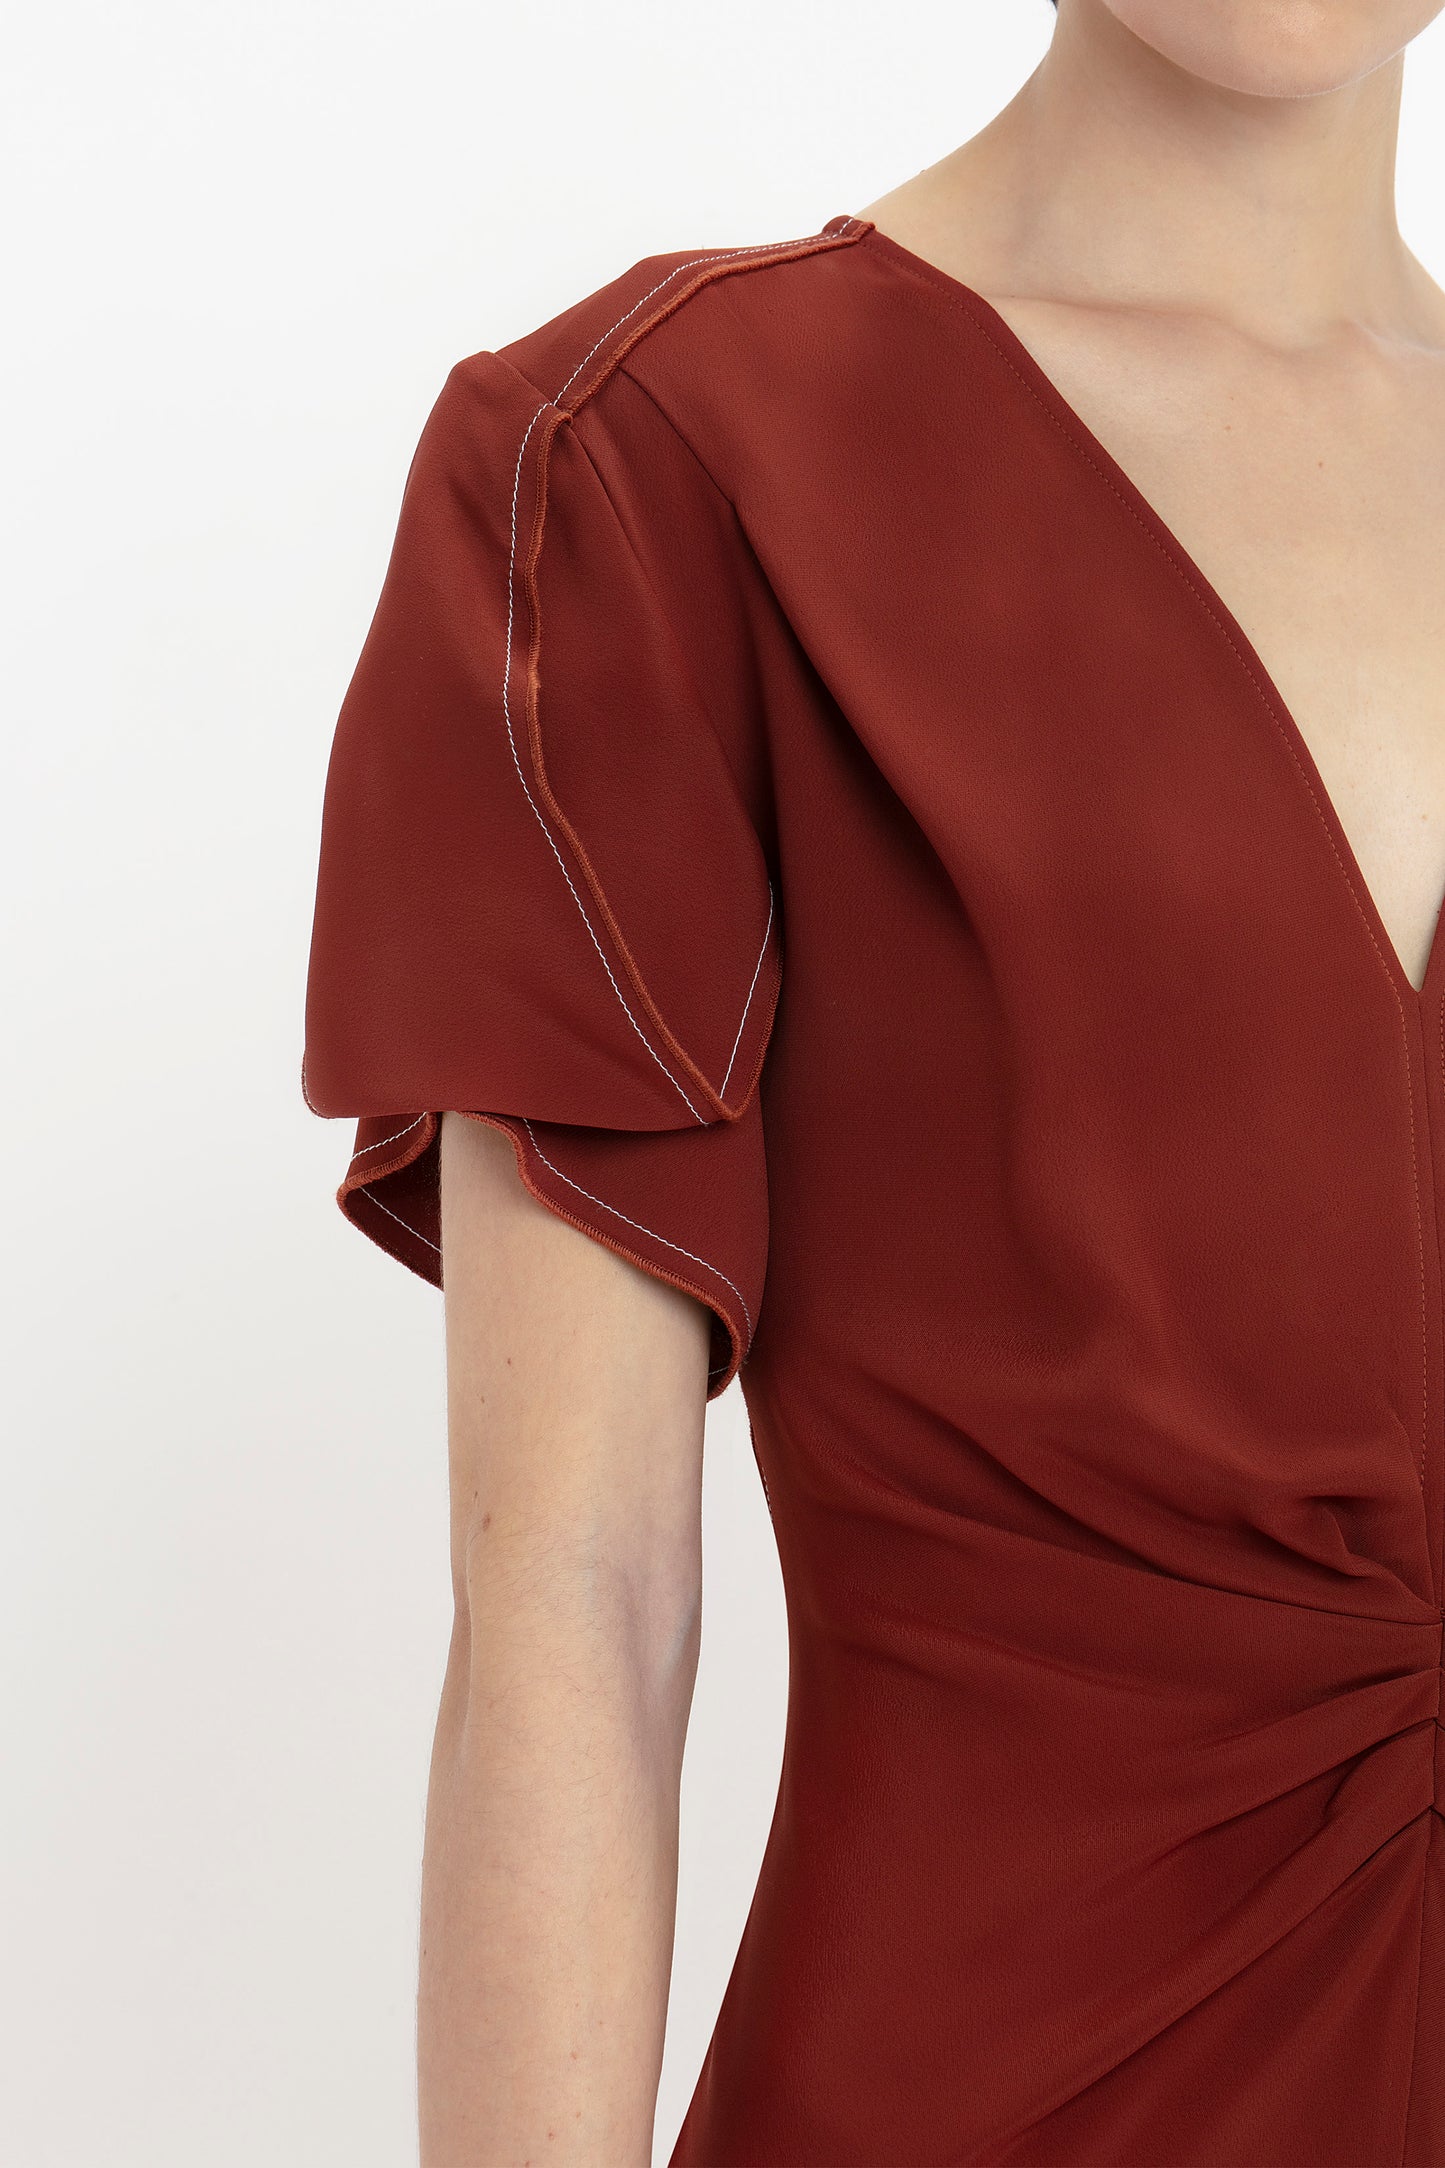 Person wearing a Victoria Beckham Gathered V-Neck Midi Dress In Russet with short, puff sleeves and detailed stitching. The figure-flattering stretch fabric enhances the upper torso focus of the image.